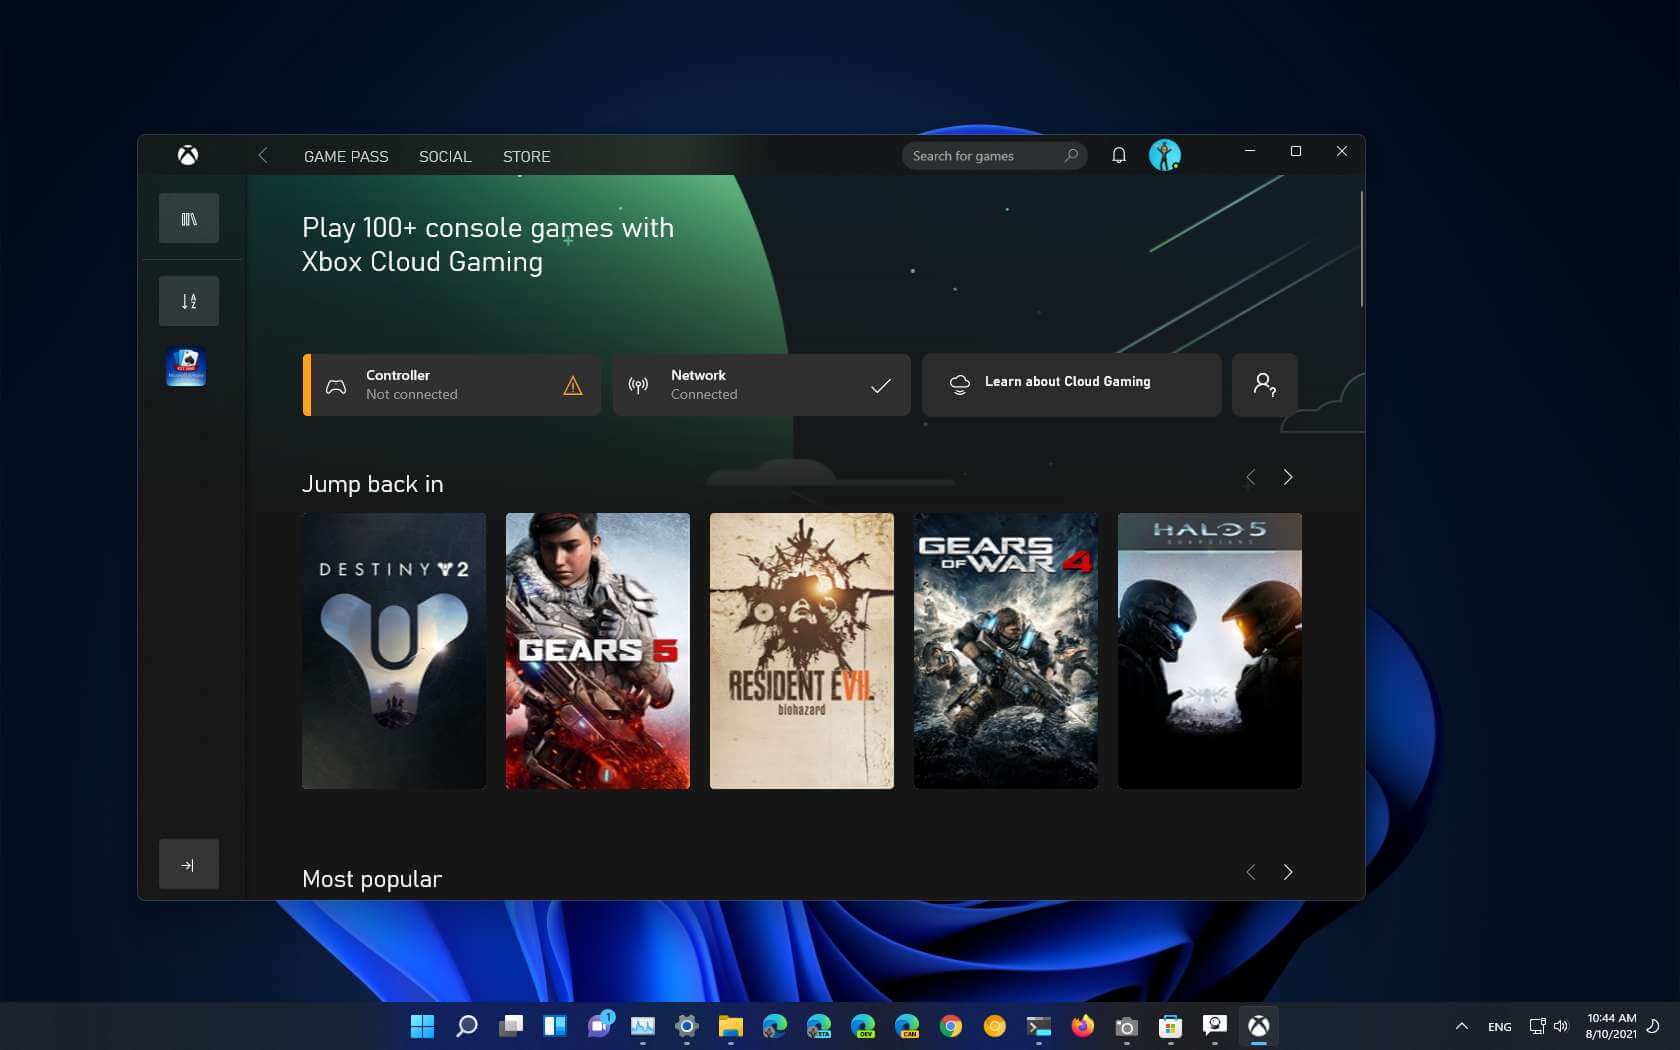 Microsoft Adds xCloud Support to the Xbox App on Windows 10